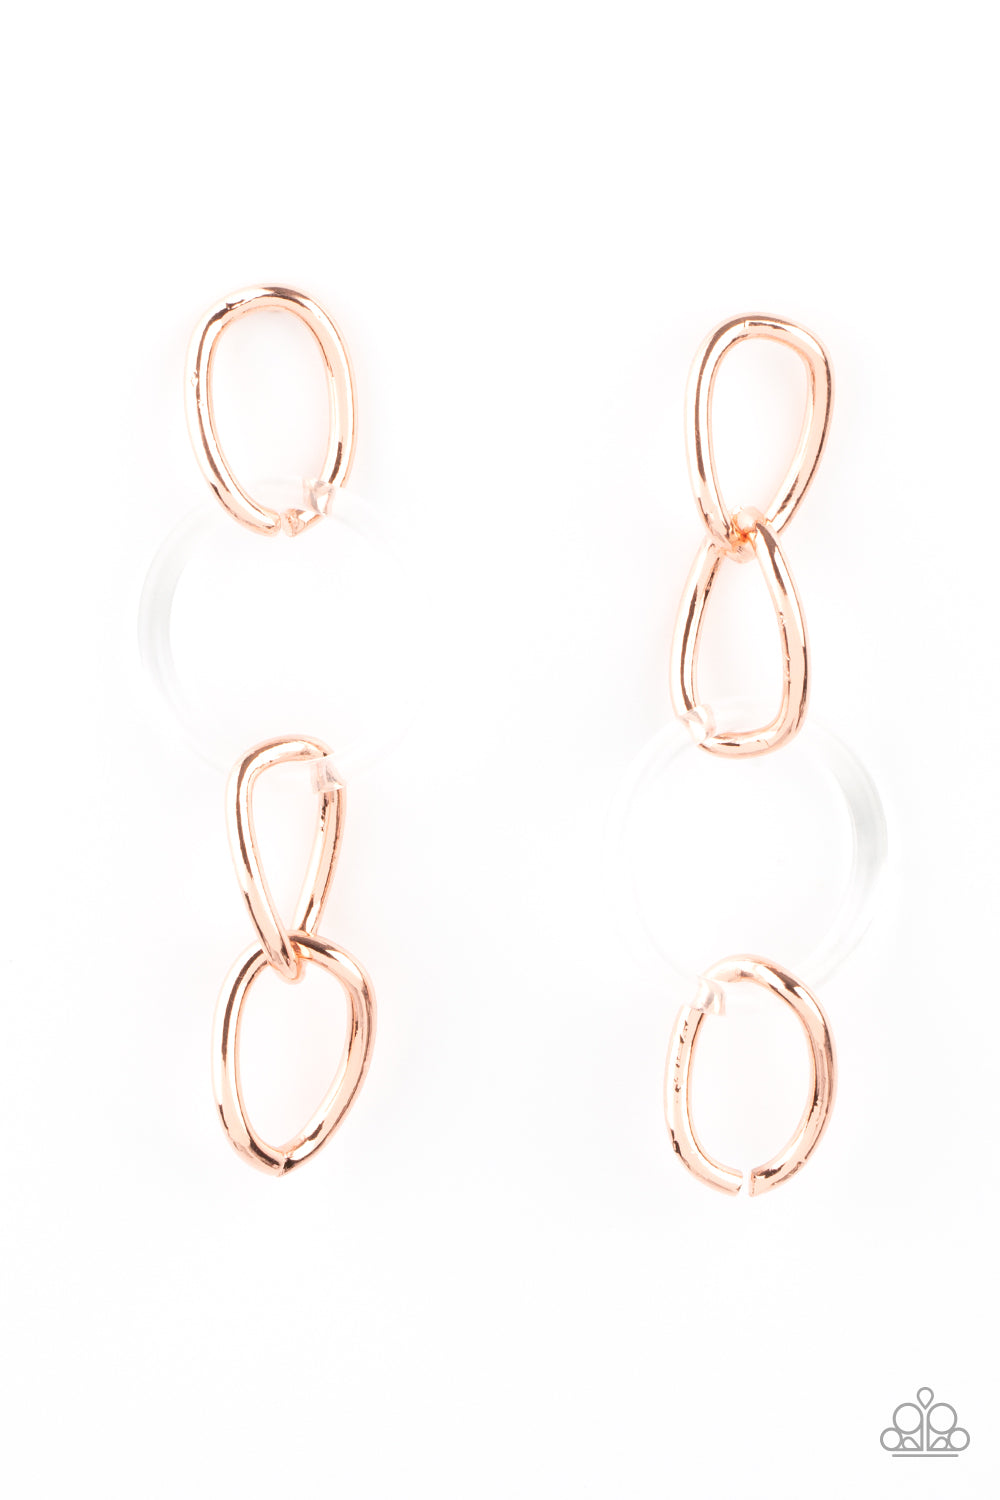 Talk In Circles - Copper & White Earrings - Princess Glam Shop